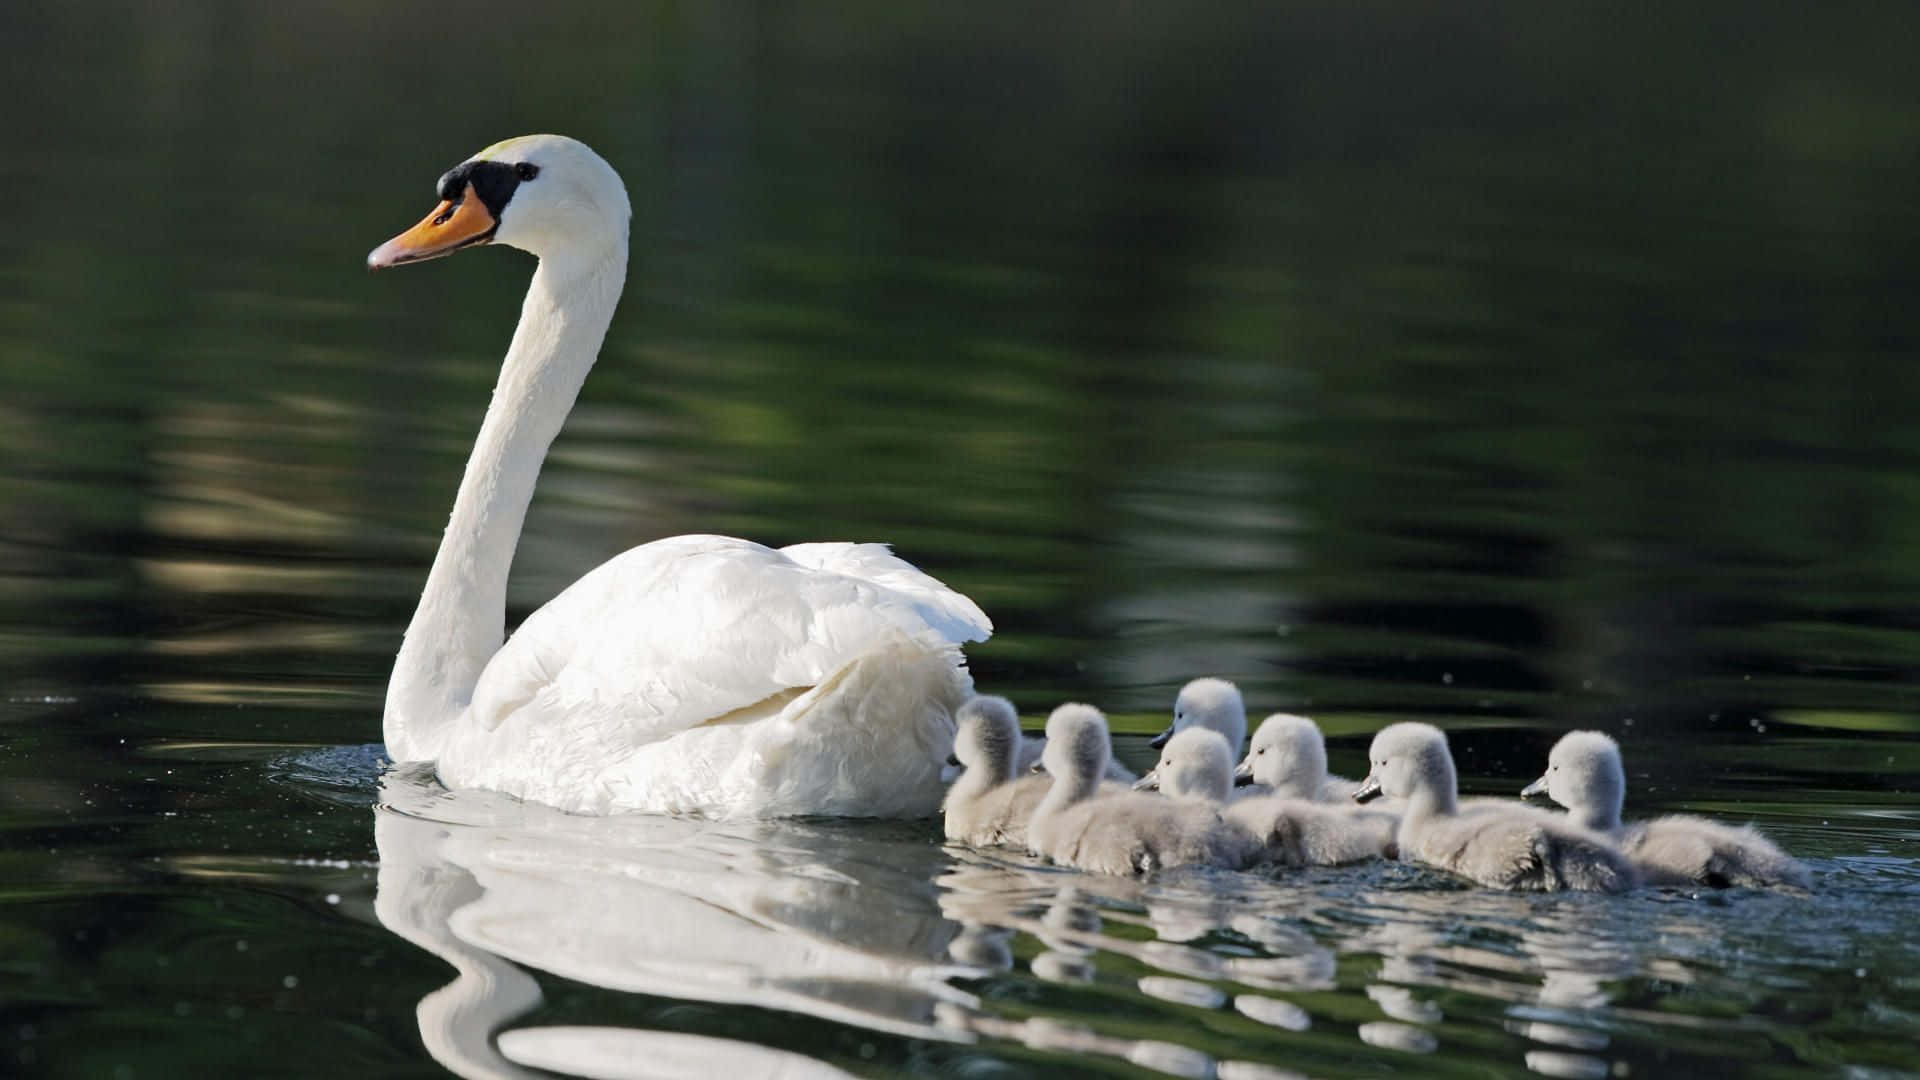 A White Swan With Its Babies Swimming In The Water